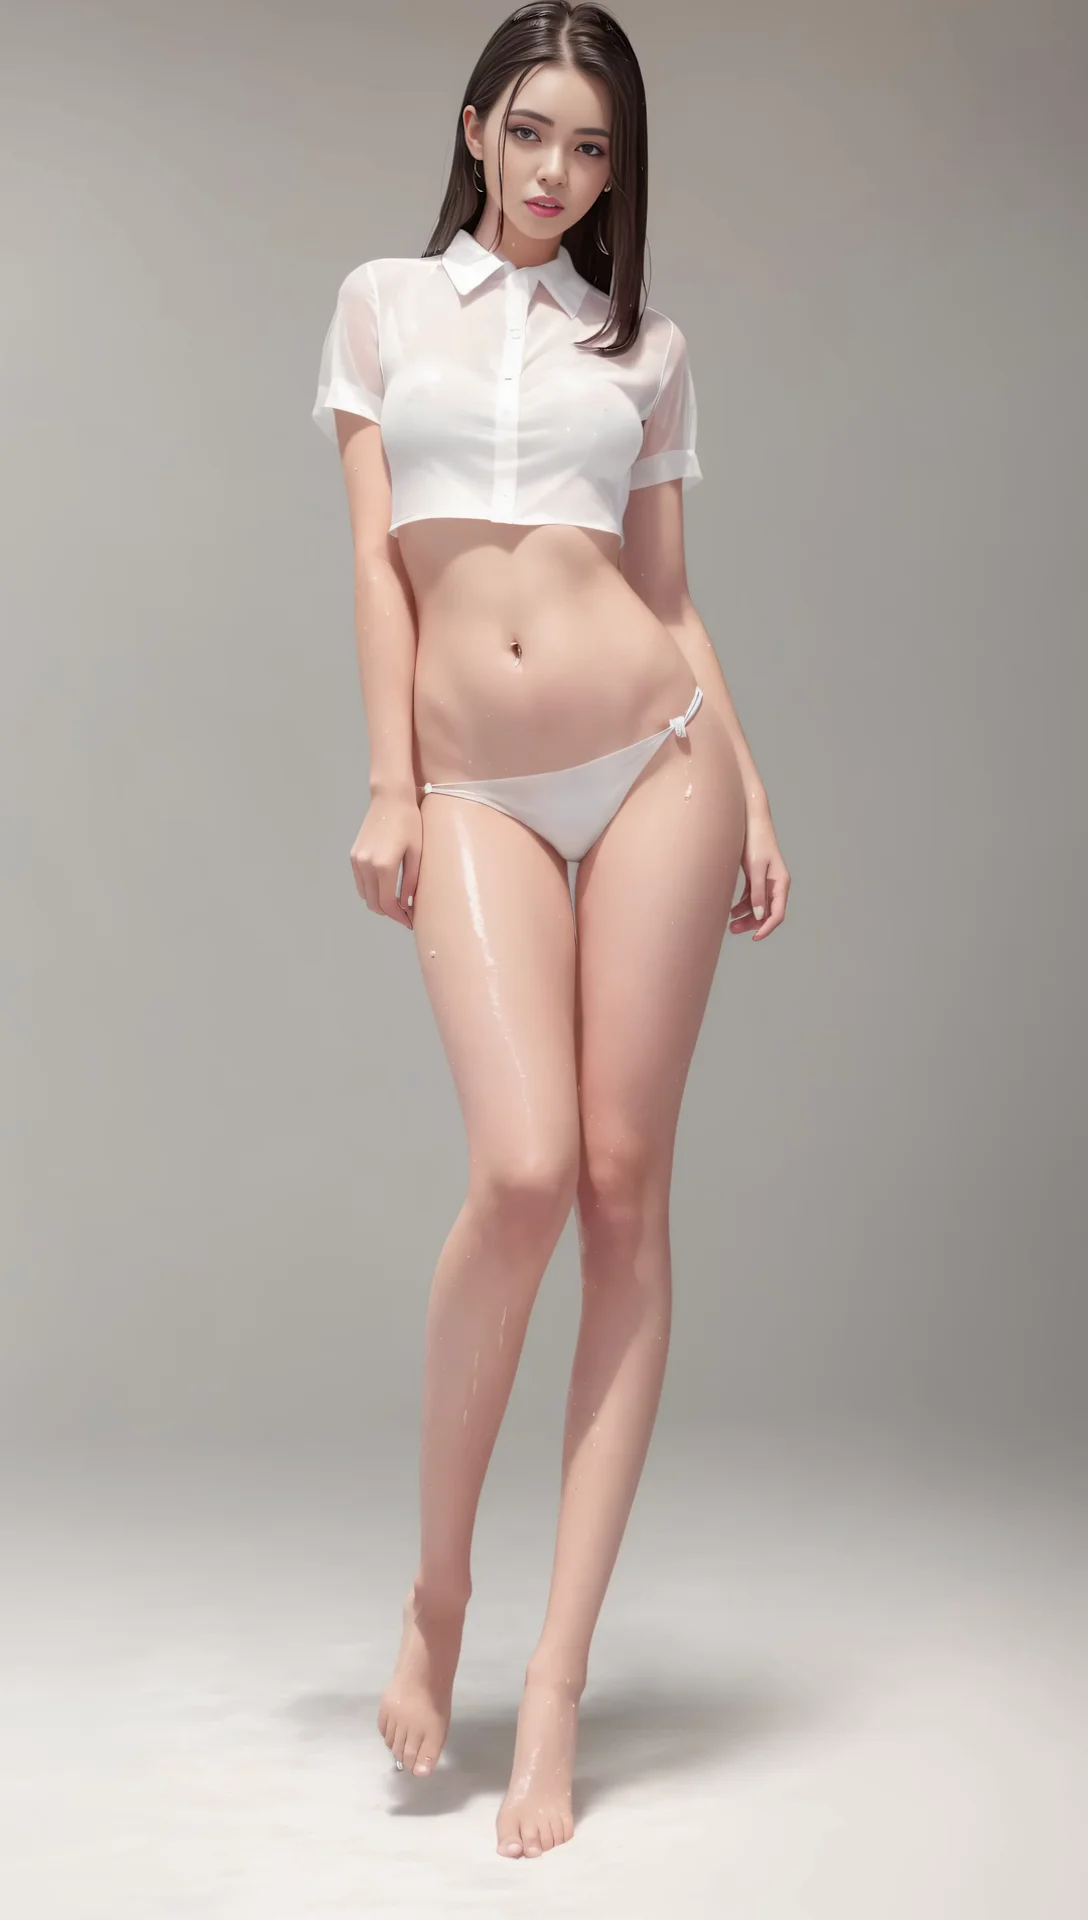 Ai Lookbook Beautiful Girl In A White Shirt And Panties Image 39